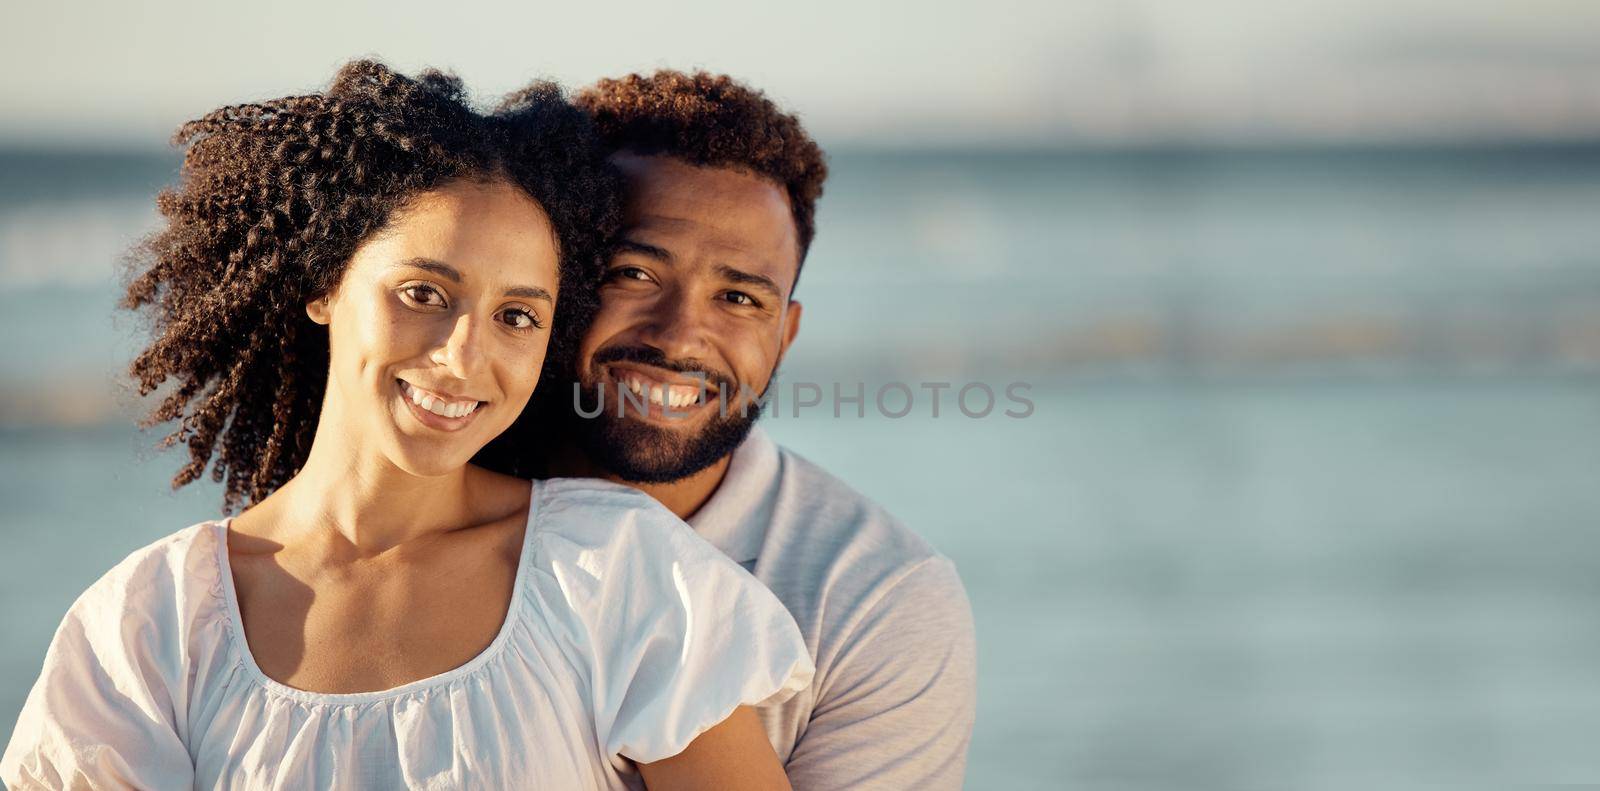 Closeup portrait of an young affectionate mixed race couple standing on the beach and smiling during sunset outdoors. Hispanic couple showing love and affection on a romantic date at the beach by YuriArcurs